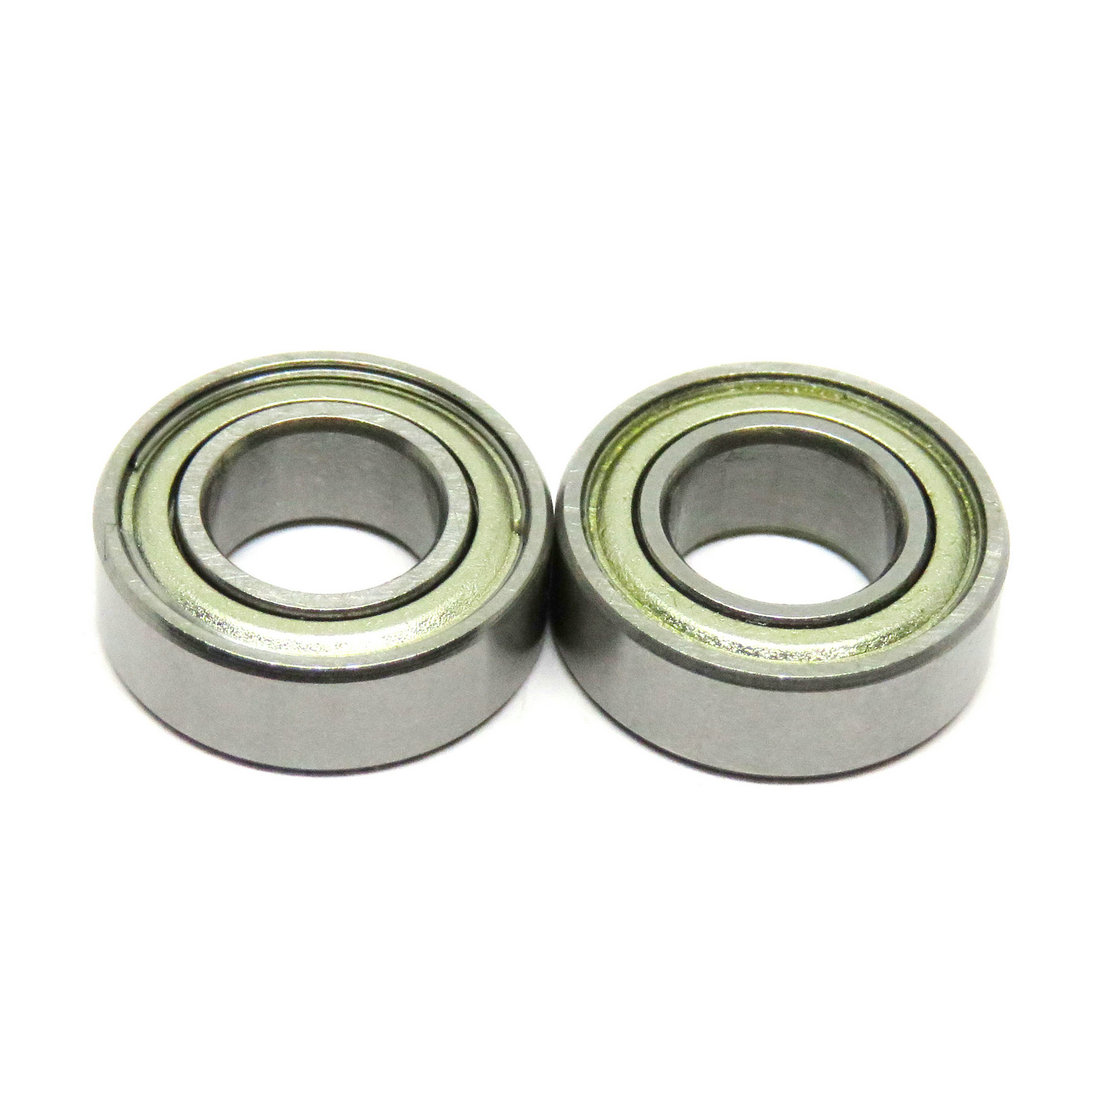 The MR126 ZZ is a 6 mm Ball Bearing that can be used in many rotary and factory automation applications.    The MR126ZZ ball bearing has a single row raceway and it is shielded on each side.   The MR126 2Z 6 mm Ball Bearing Inner Dimension 6mm X Outer Dimension 12mm X Width 3mm is an metal shield ball bearing designed for high rotational speeds and high dynamic loads..jpg